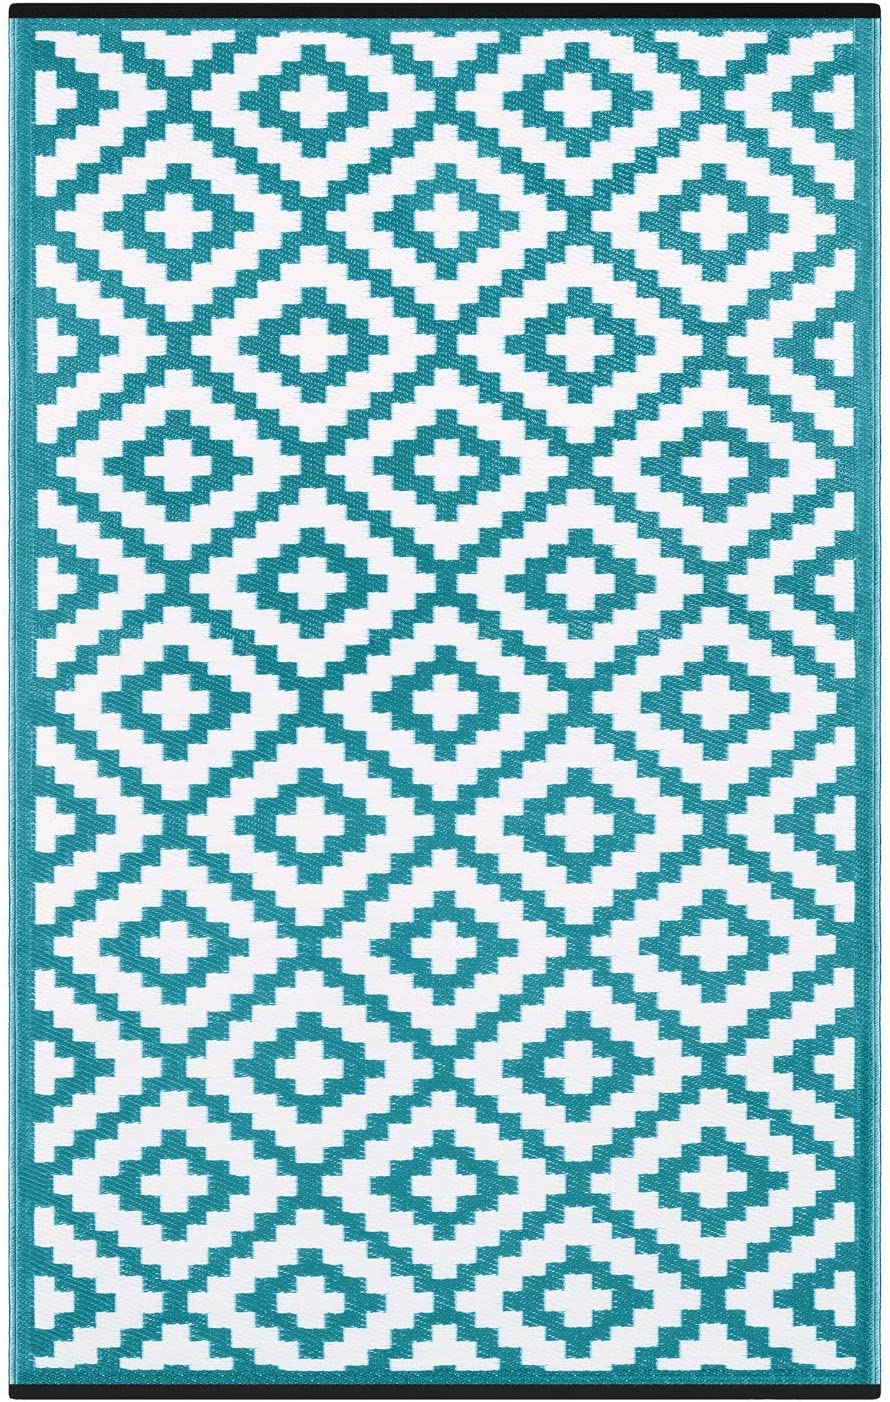 Camping rugs